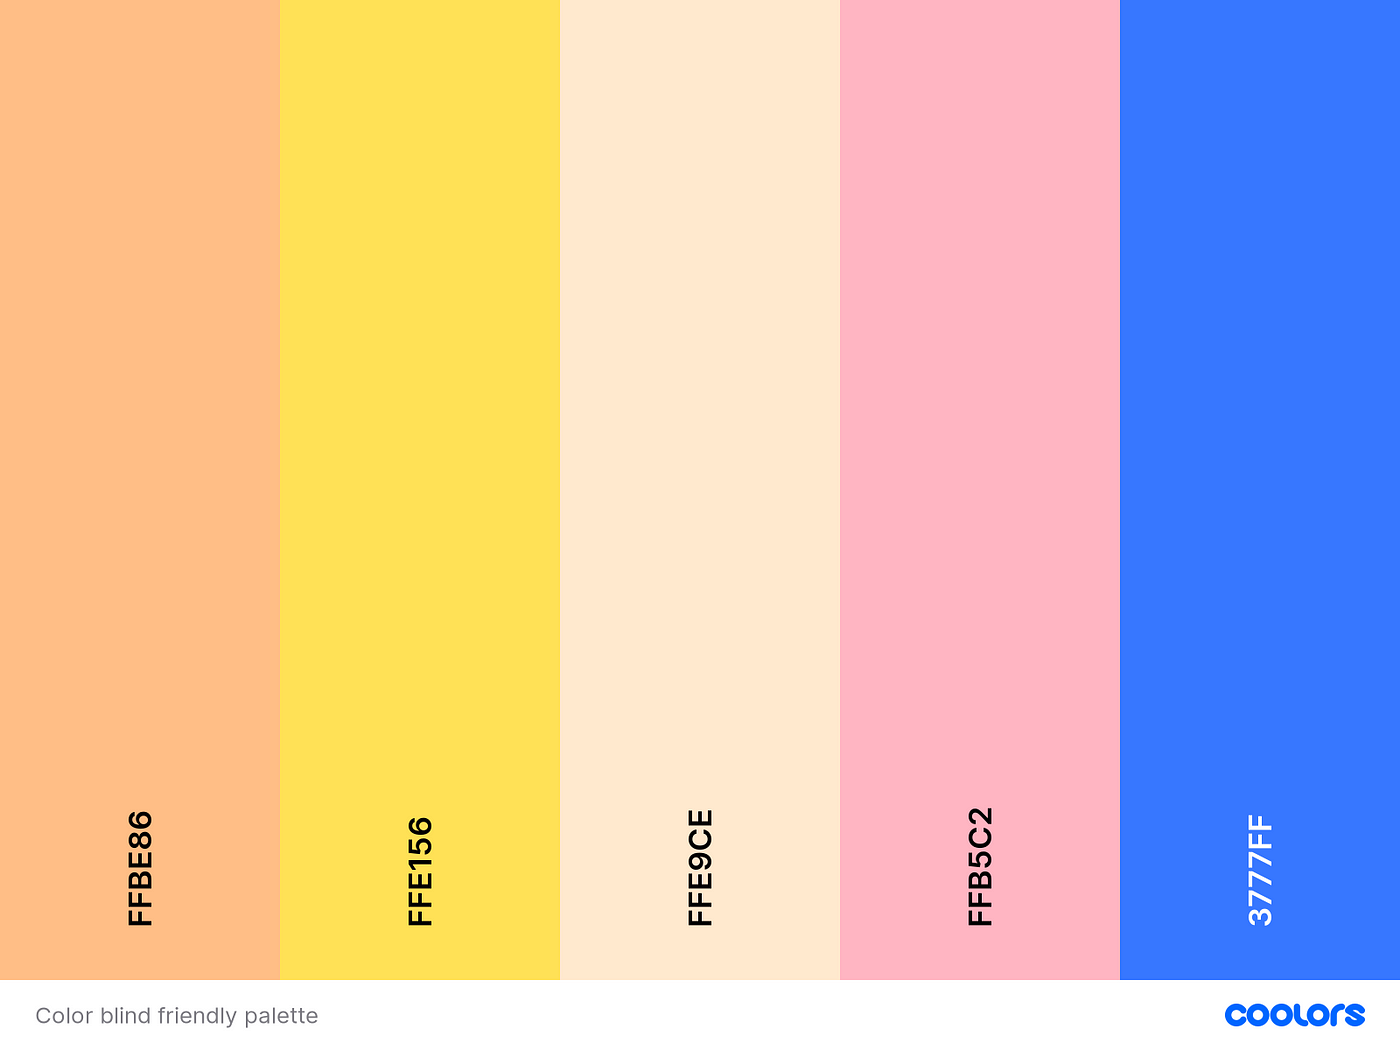 How I Designed a Colorblind-Friendly Palette | by Swedel Lasrado | The  Startup | Medium